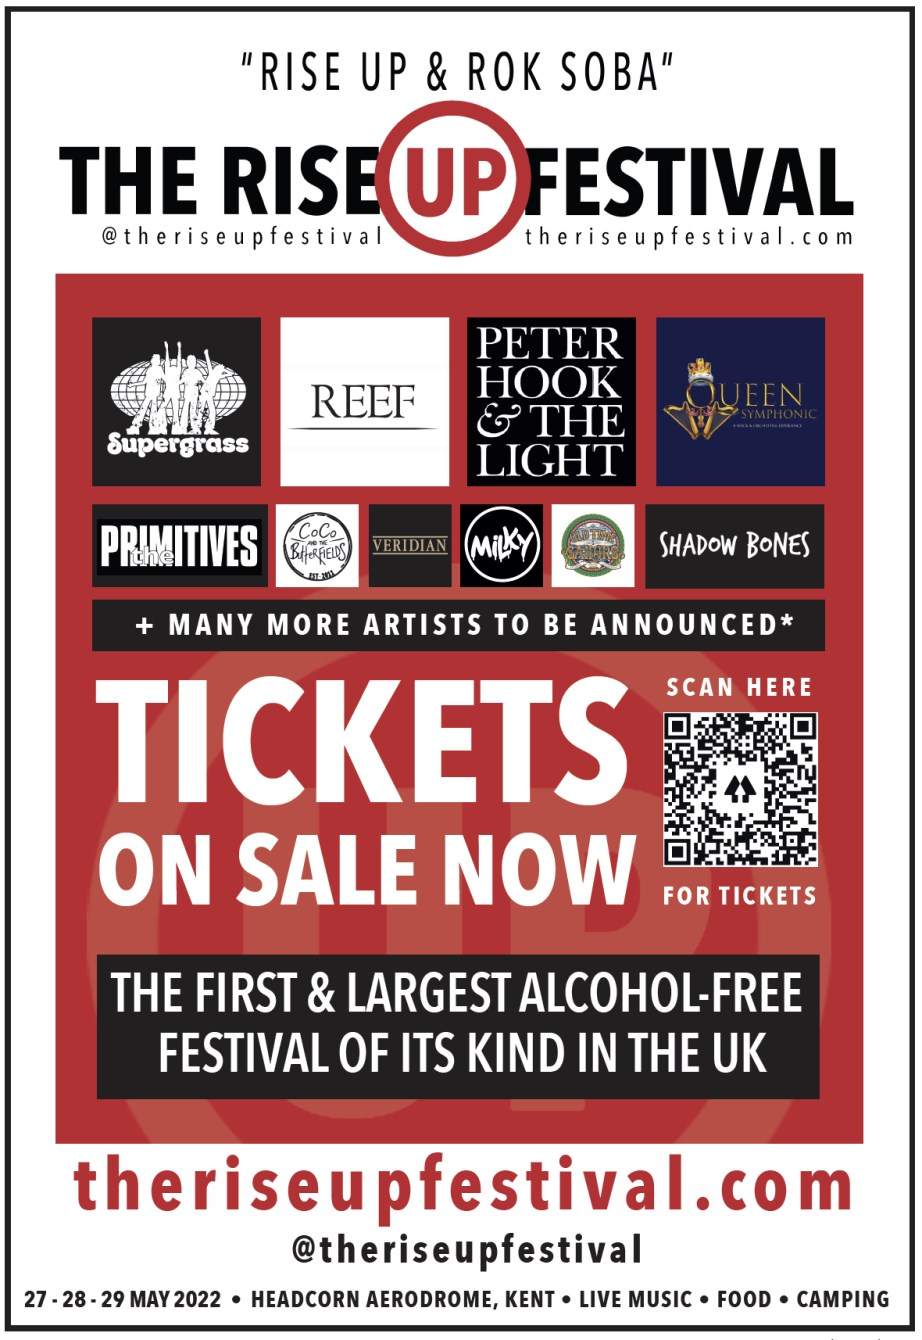 The Rise Up Festival - The Uk's First & Largest Alcohol-Free Festival - Página trasera